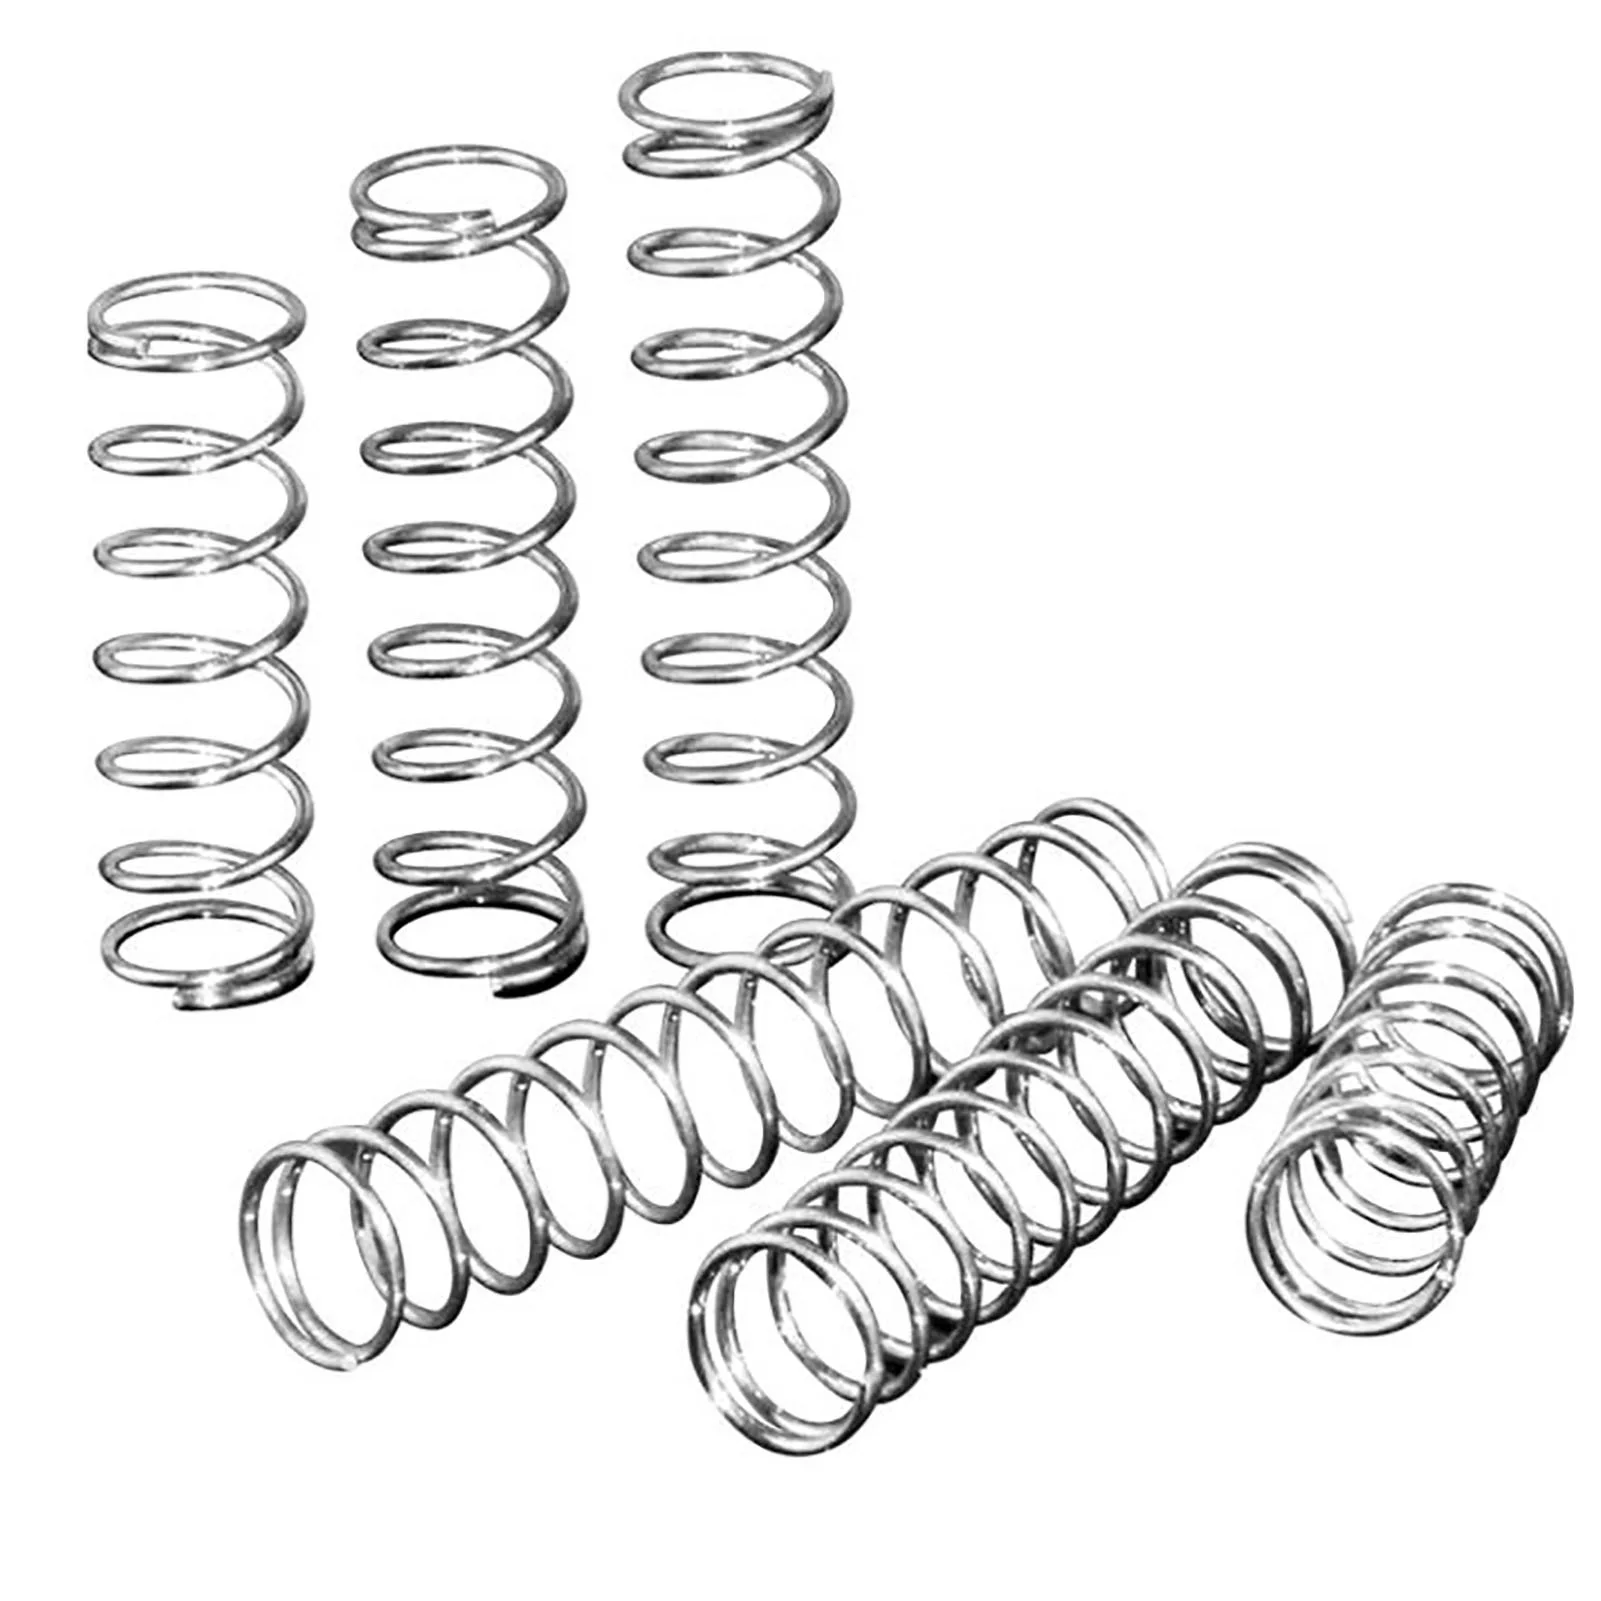 

0.7x8mm, 0.7mm Wire Diameter, 8mm Outer Diameter, 10-50mm Free Length, 304 Stainless Steel Compression Spring, 10PCS